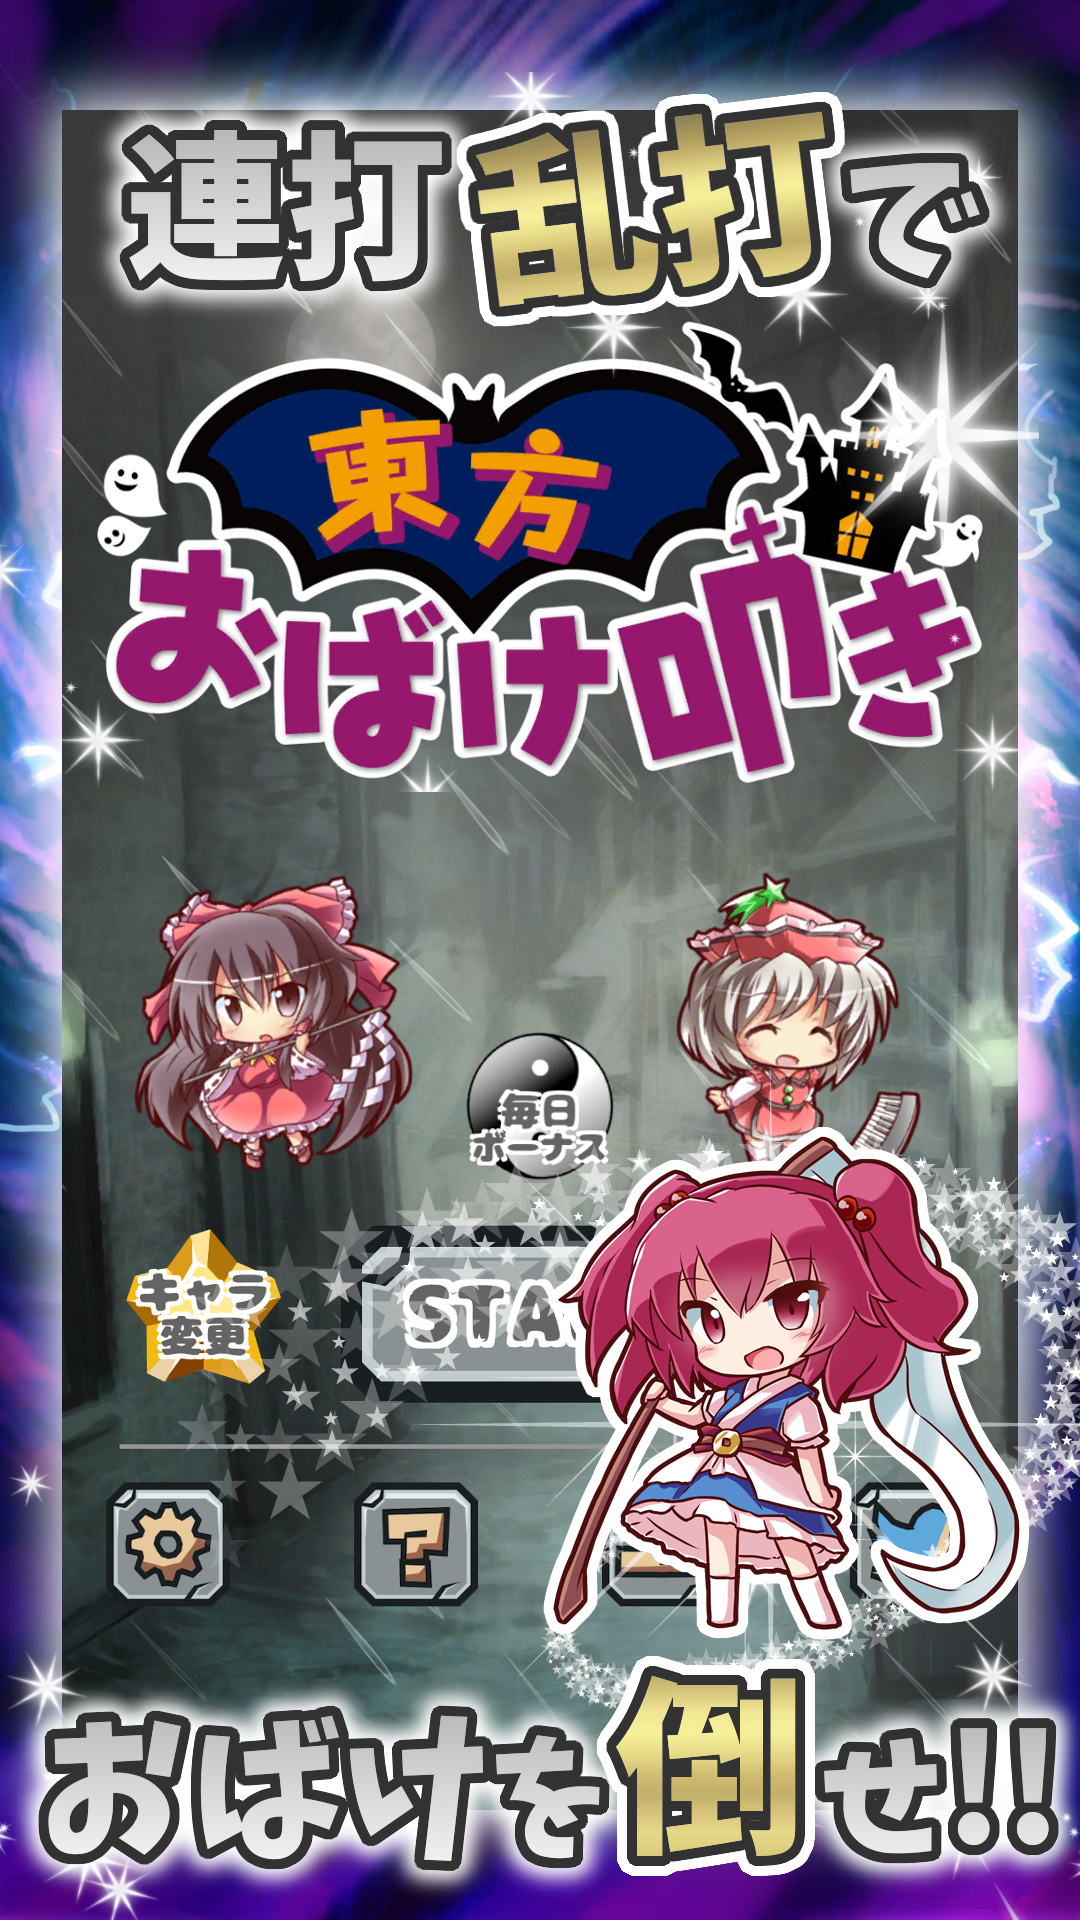 Screenshot 1 of Touhou Ghost Beating ~ Estimulante Brain Training Number Touch ~ 2.0.3